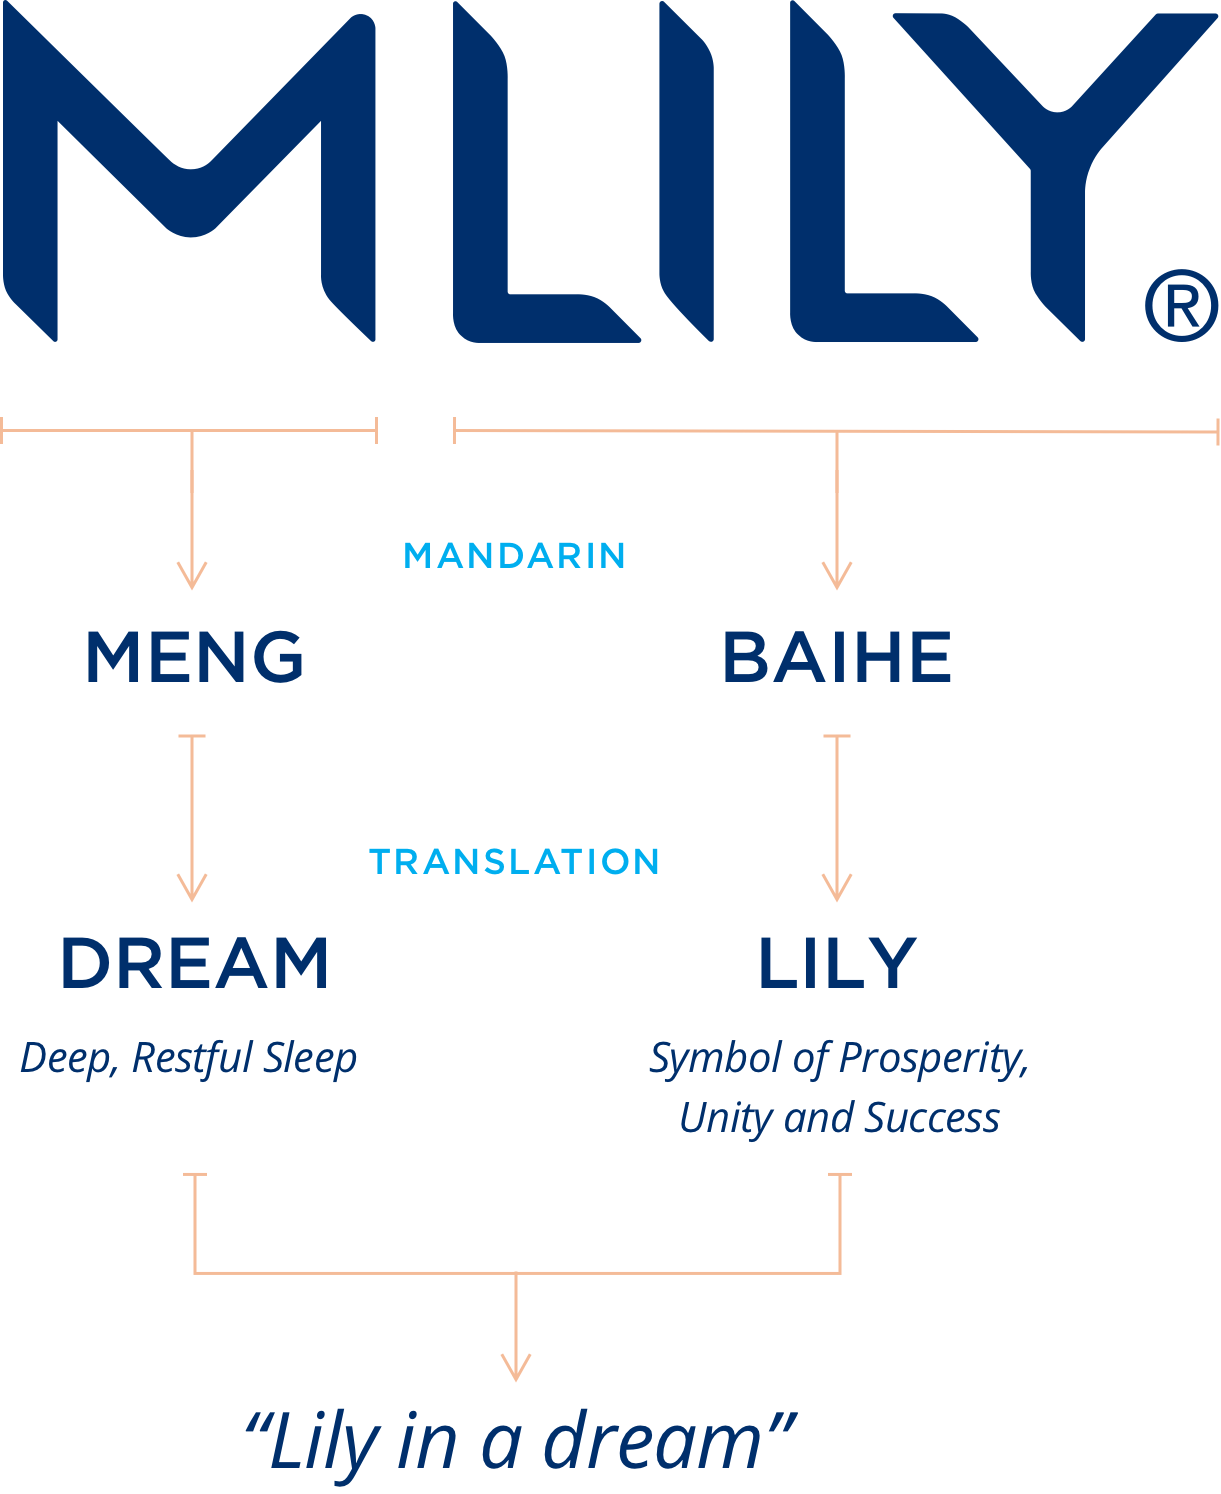 A breakdown of the MLILY logo meaning